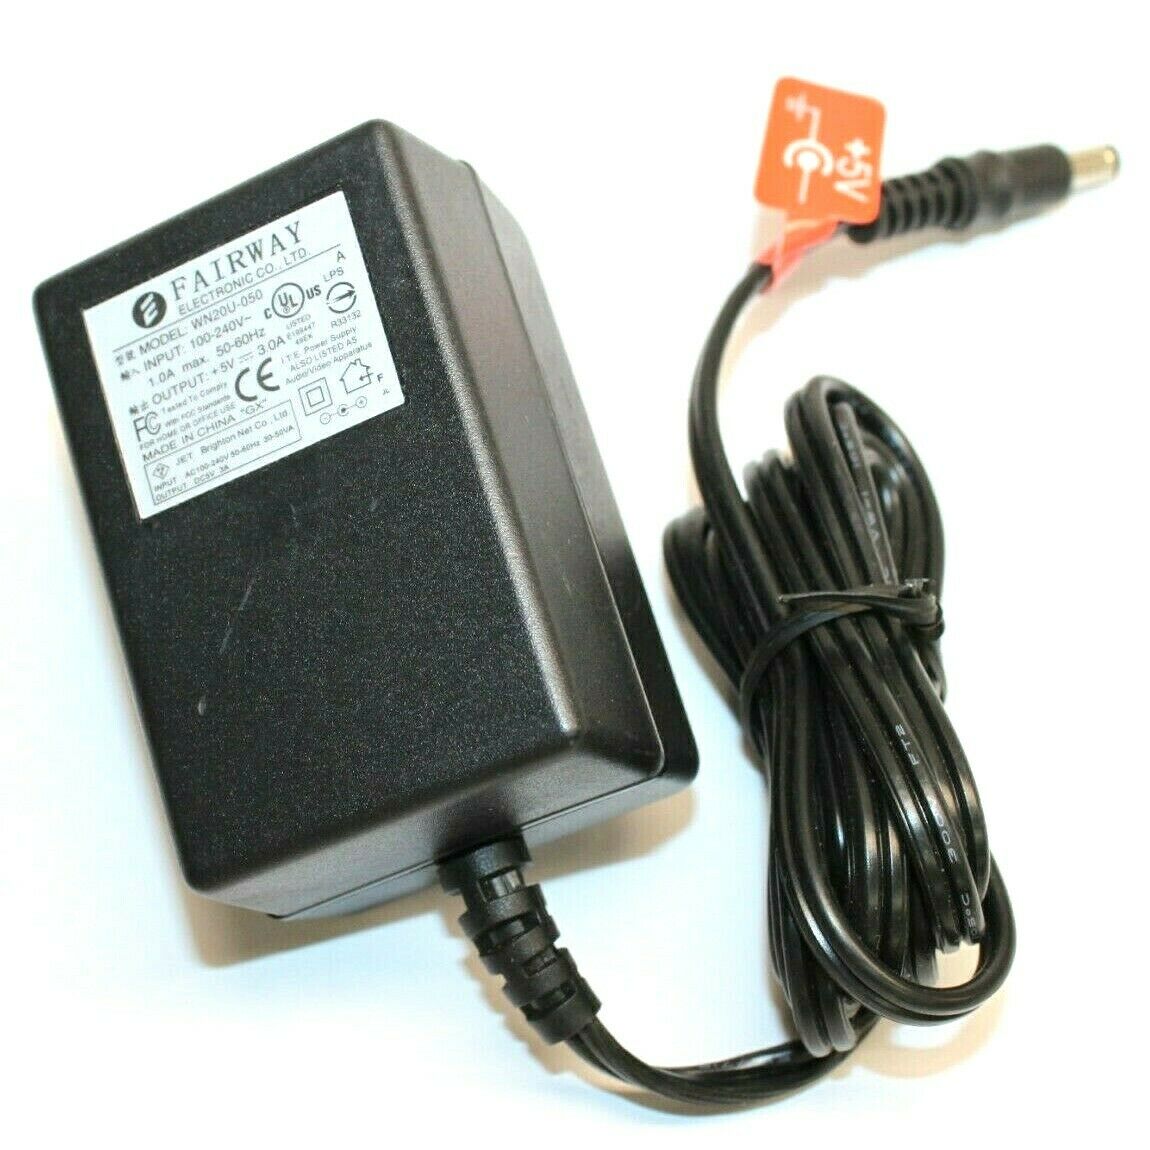 Fairway WN20U-050 AC Power Supply Adapter Output 5V DC 3.0A 3000mA Charger Brand: Fairway Type: Power Adapter Comp